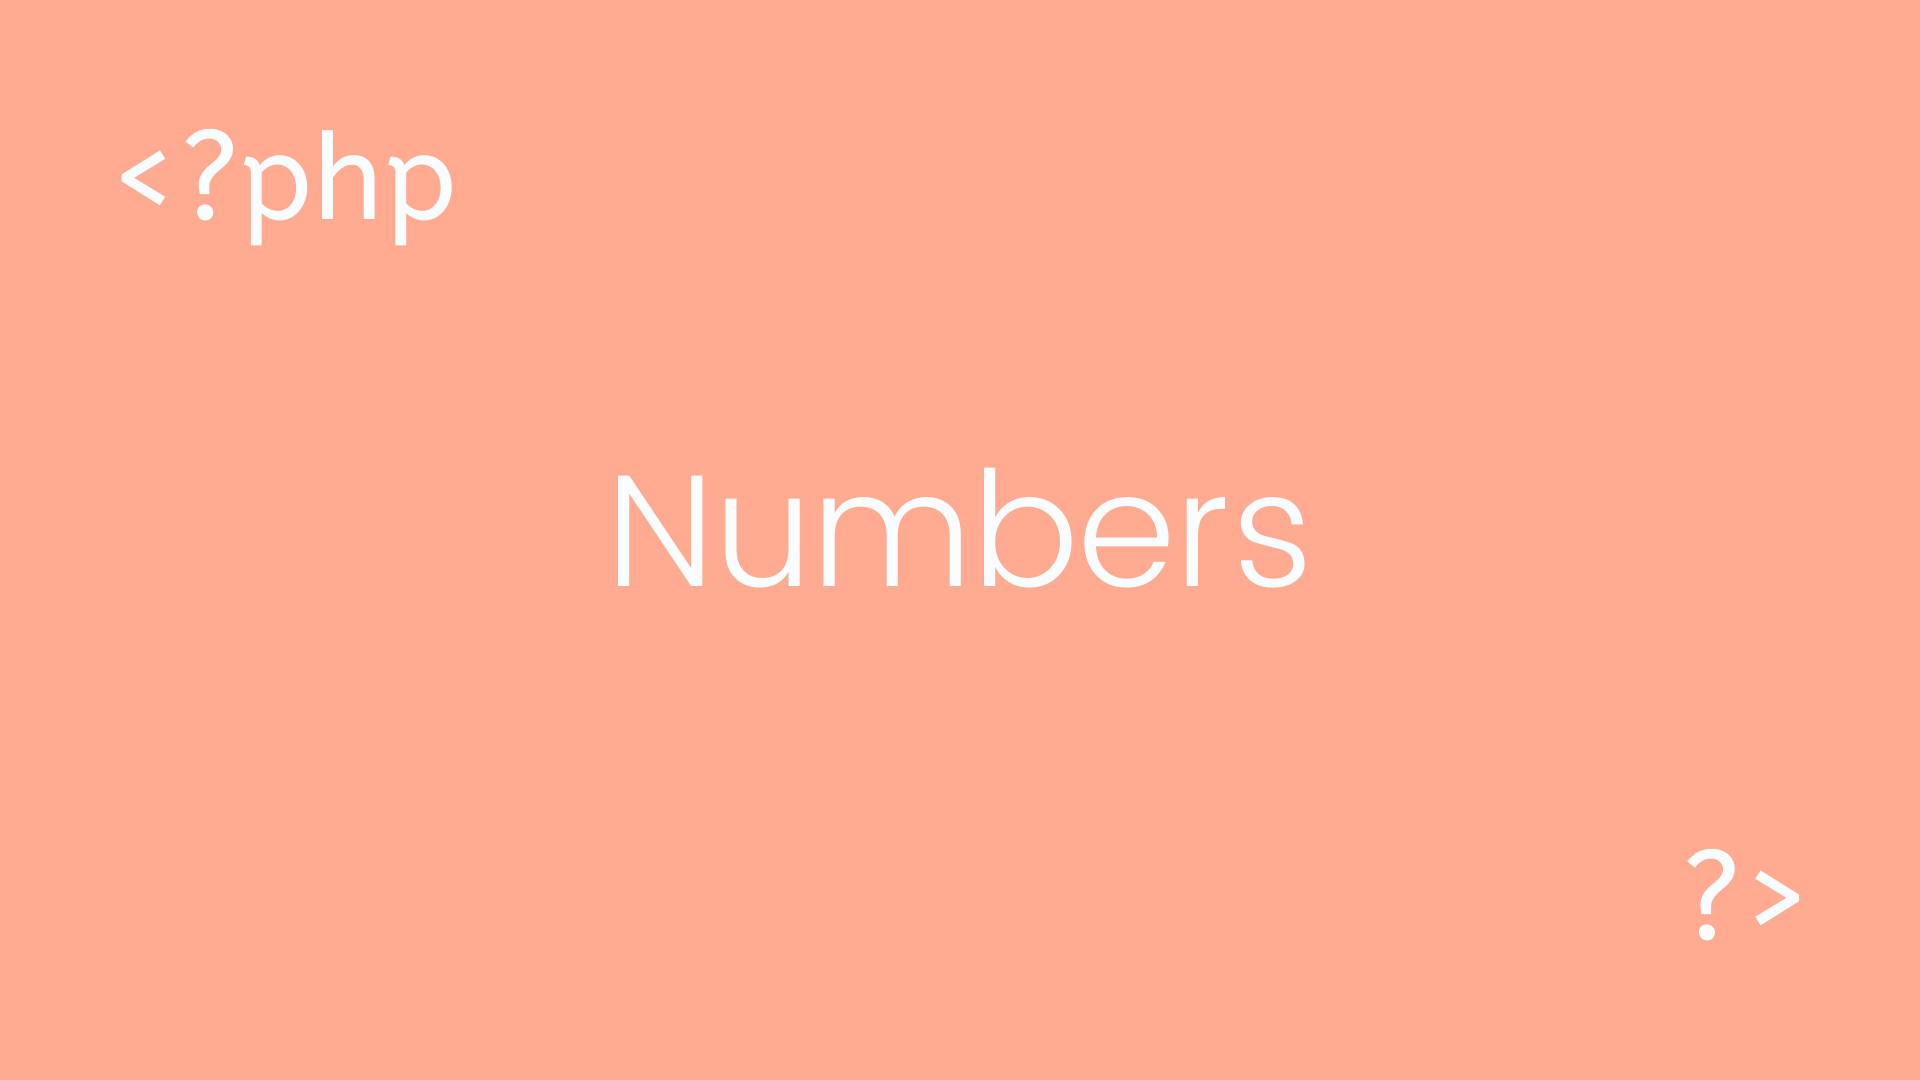 PHP Numbers